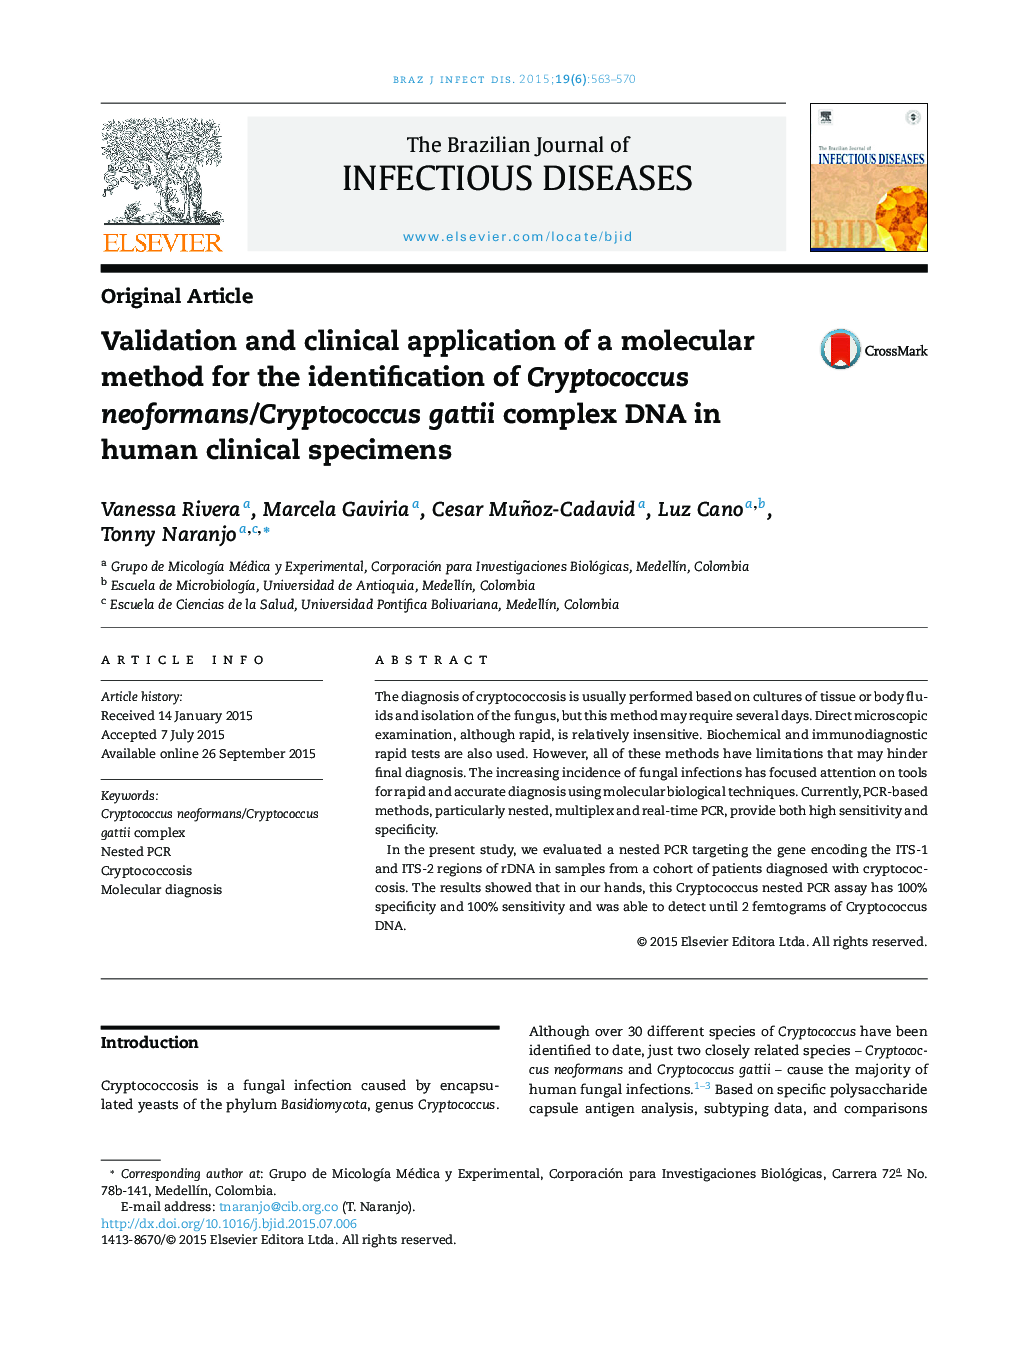 Validation and clinical application of a molecular method for the identification of Cryptococcus neoformans/Cryptococcus gattii complex DNA in human clinical specimens